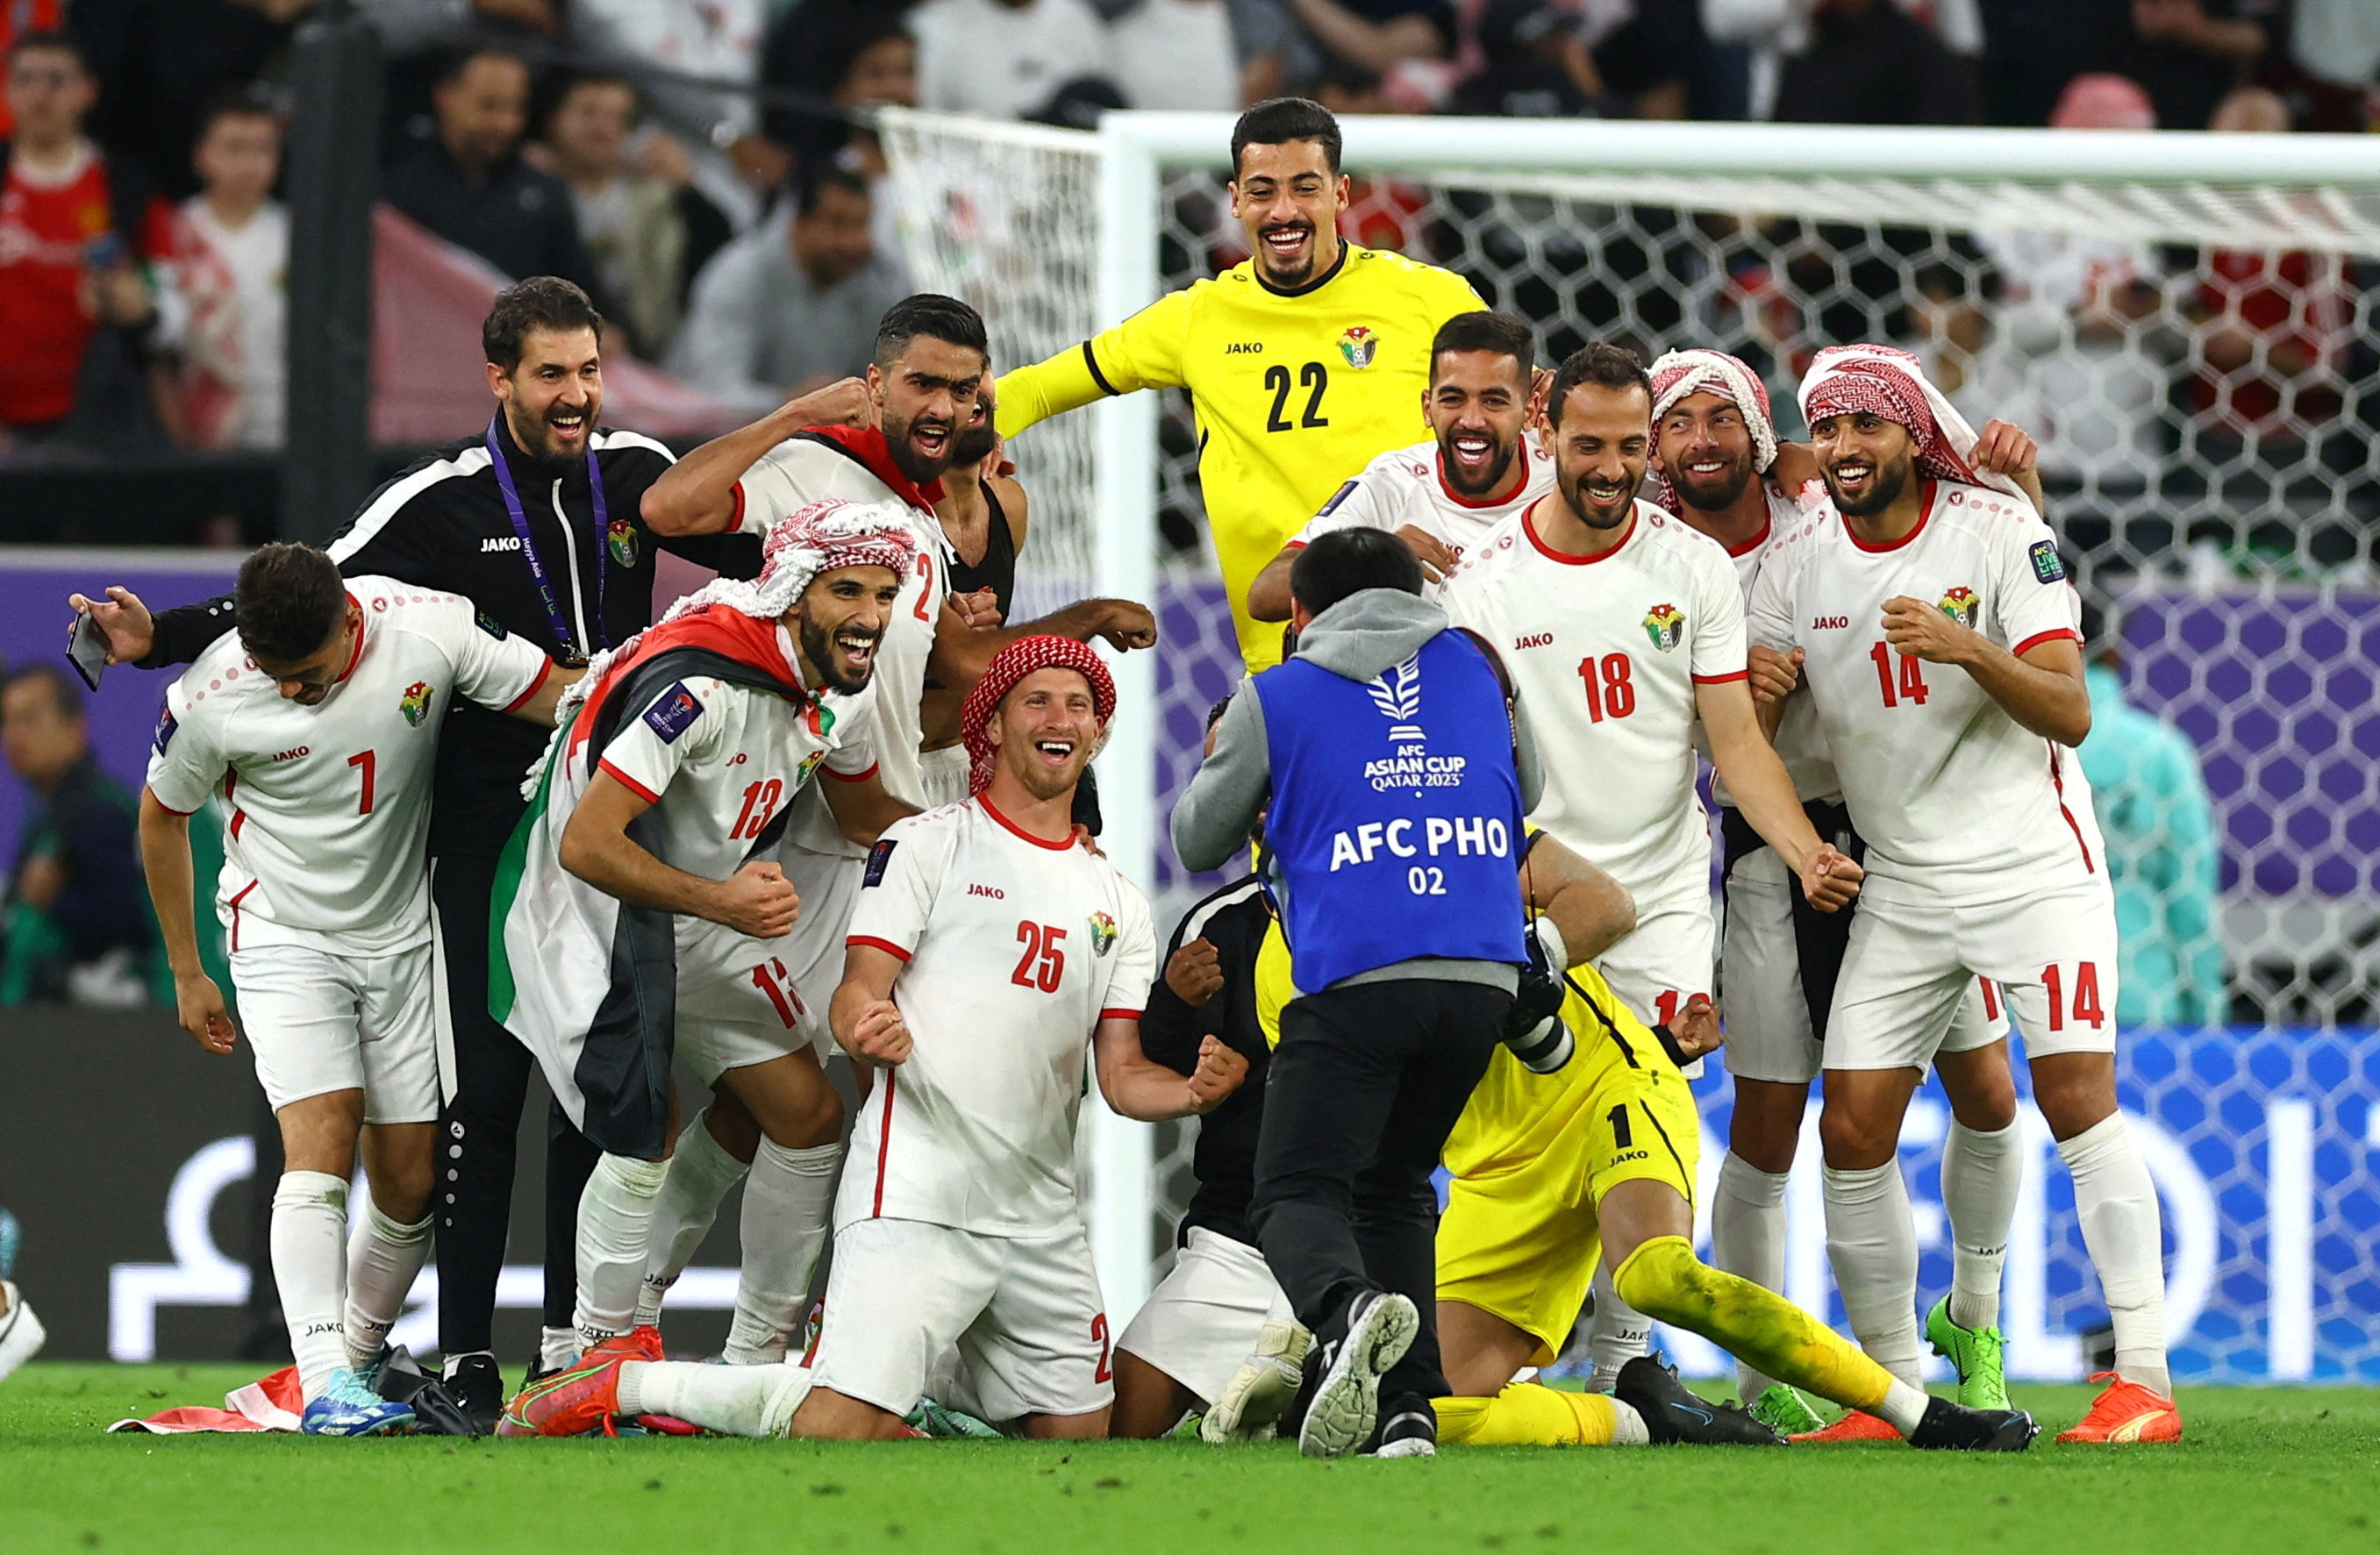 Jordan players celebrate after reaching the Asian Cup final. Photo: Reuters